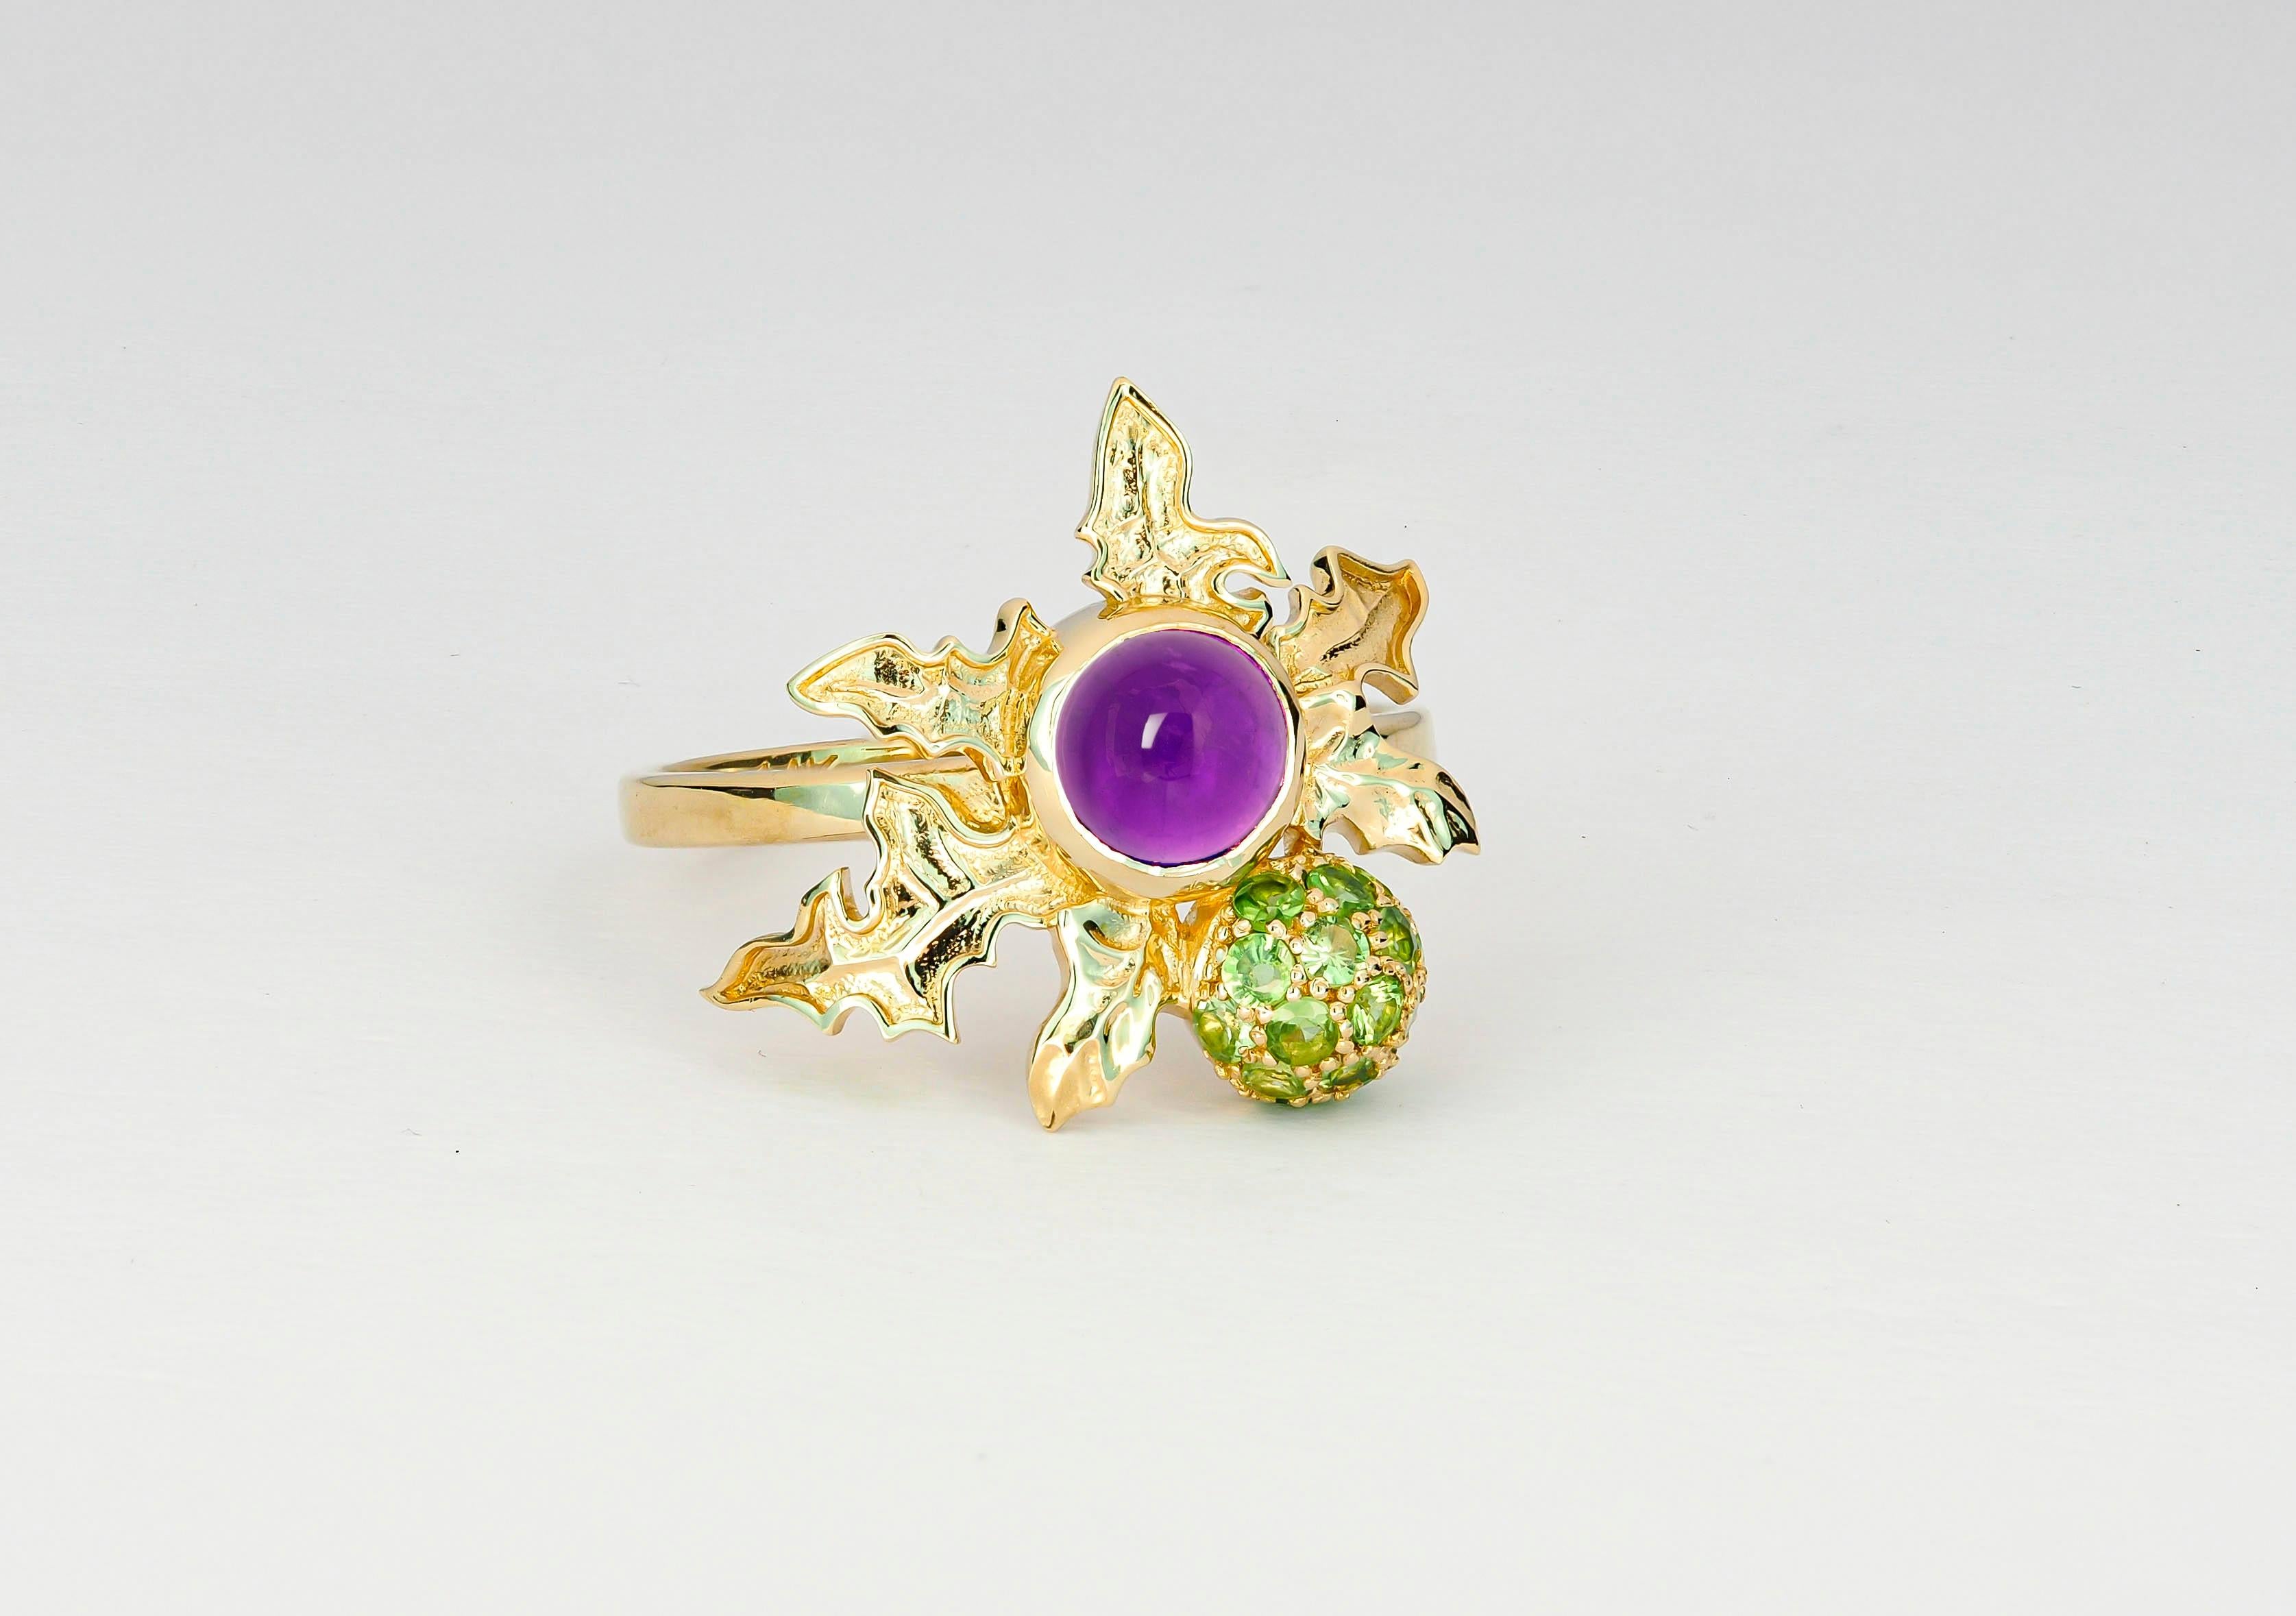 For Sale:  14 K Gold Scottish Thistle Ring with Amethyst and Peridots! 5